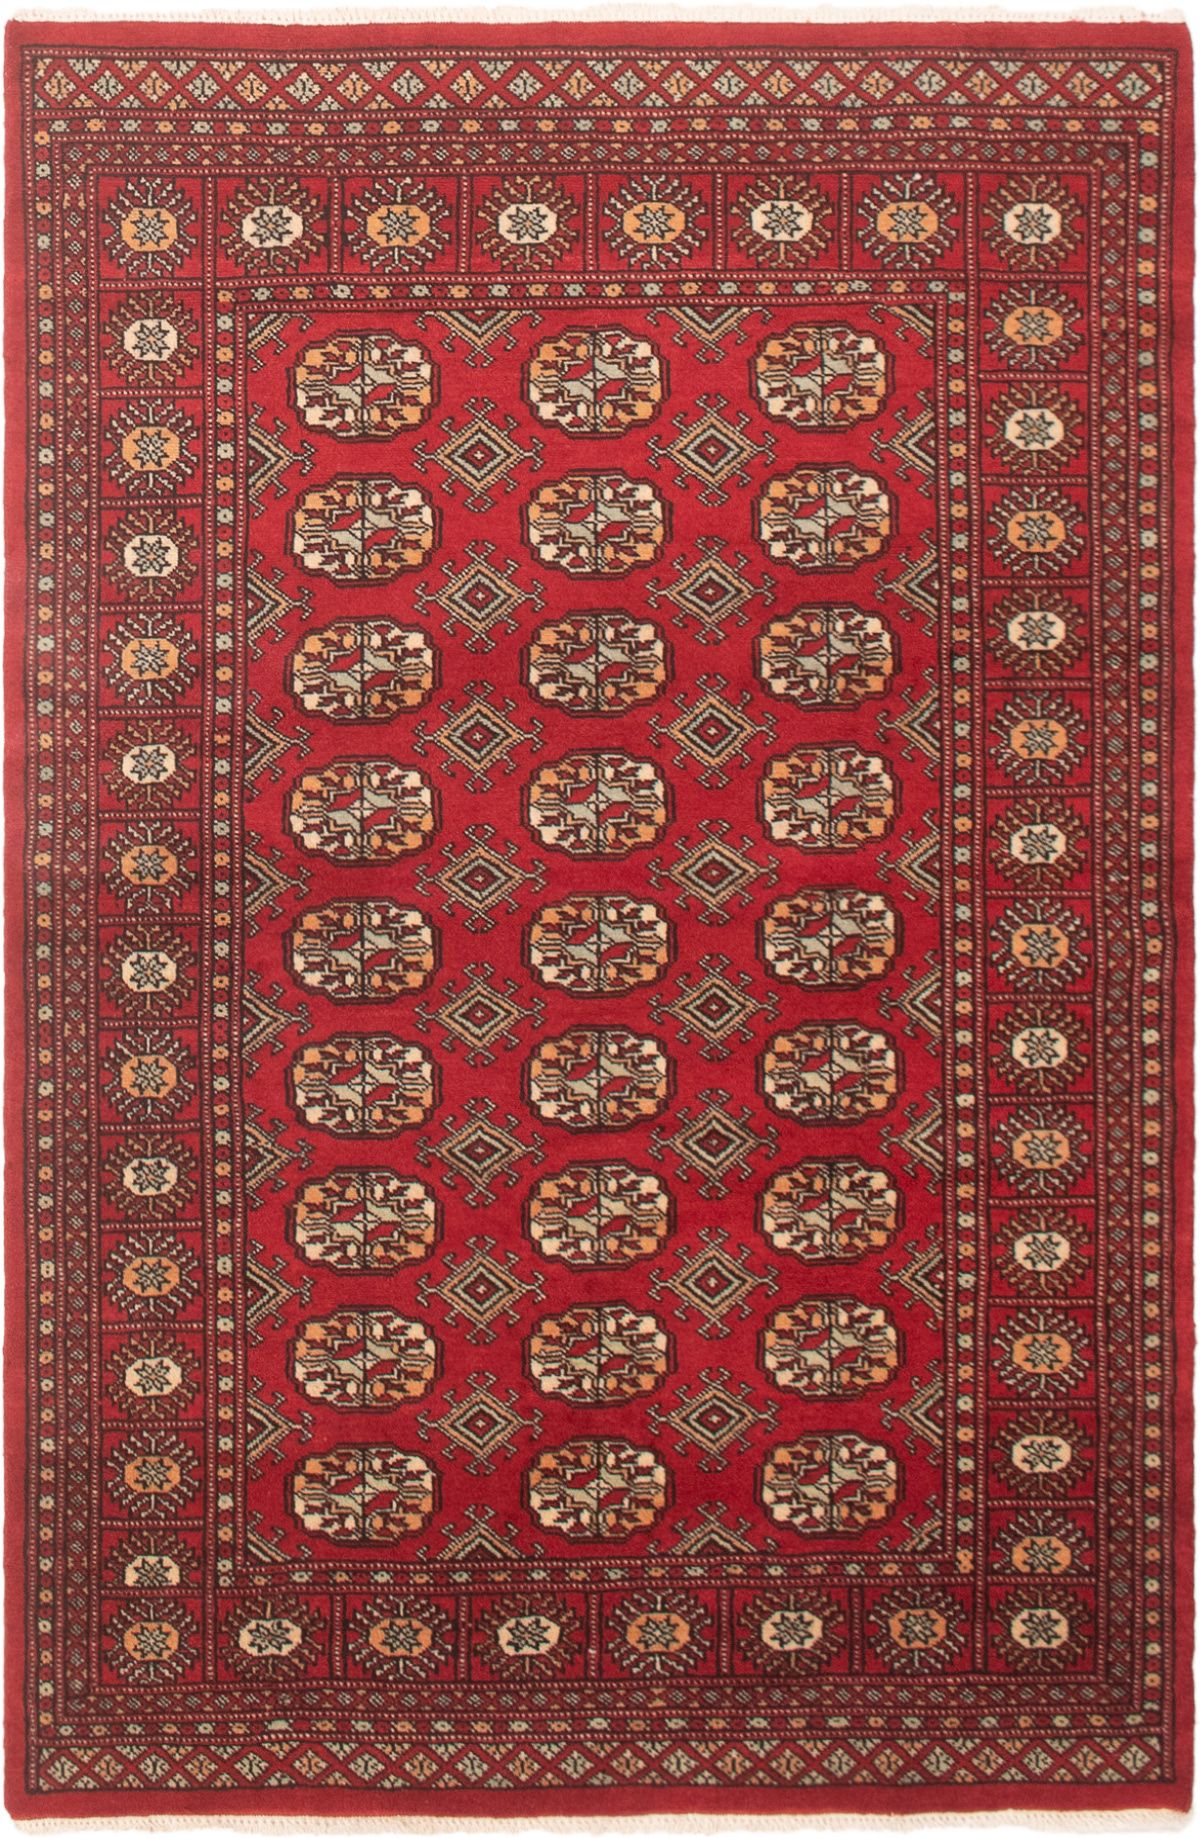 Hand-knotted Finest Peshawar Bokhara Red Wool Rug 4'1" x 6'1"  Size: 4'1" x 6'1"  